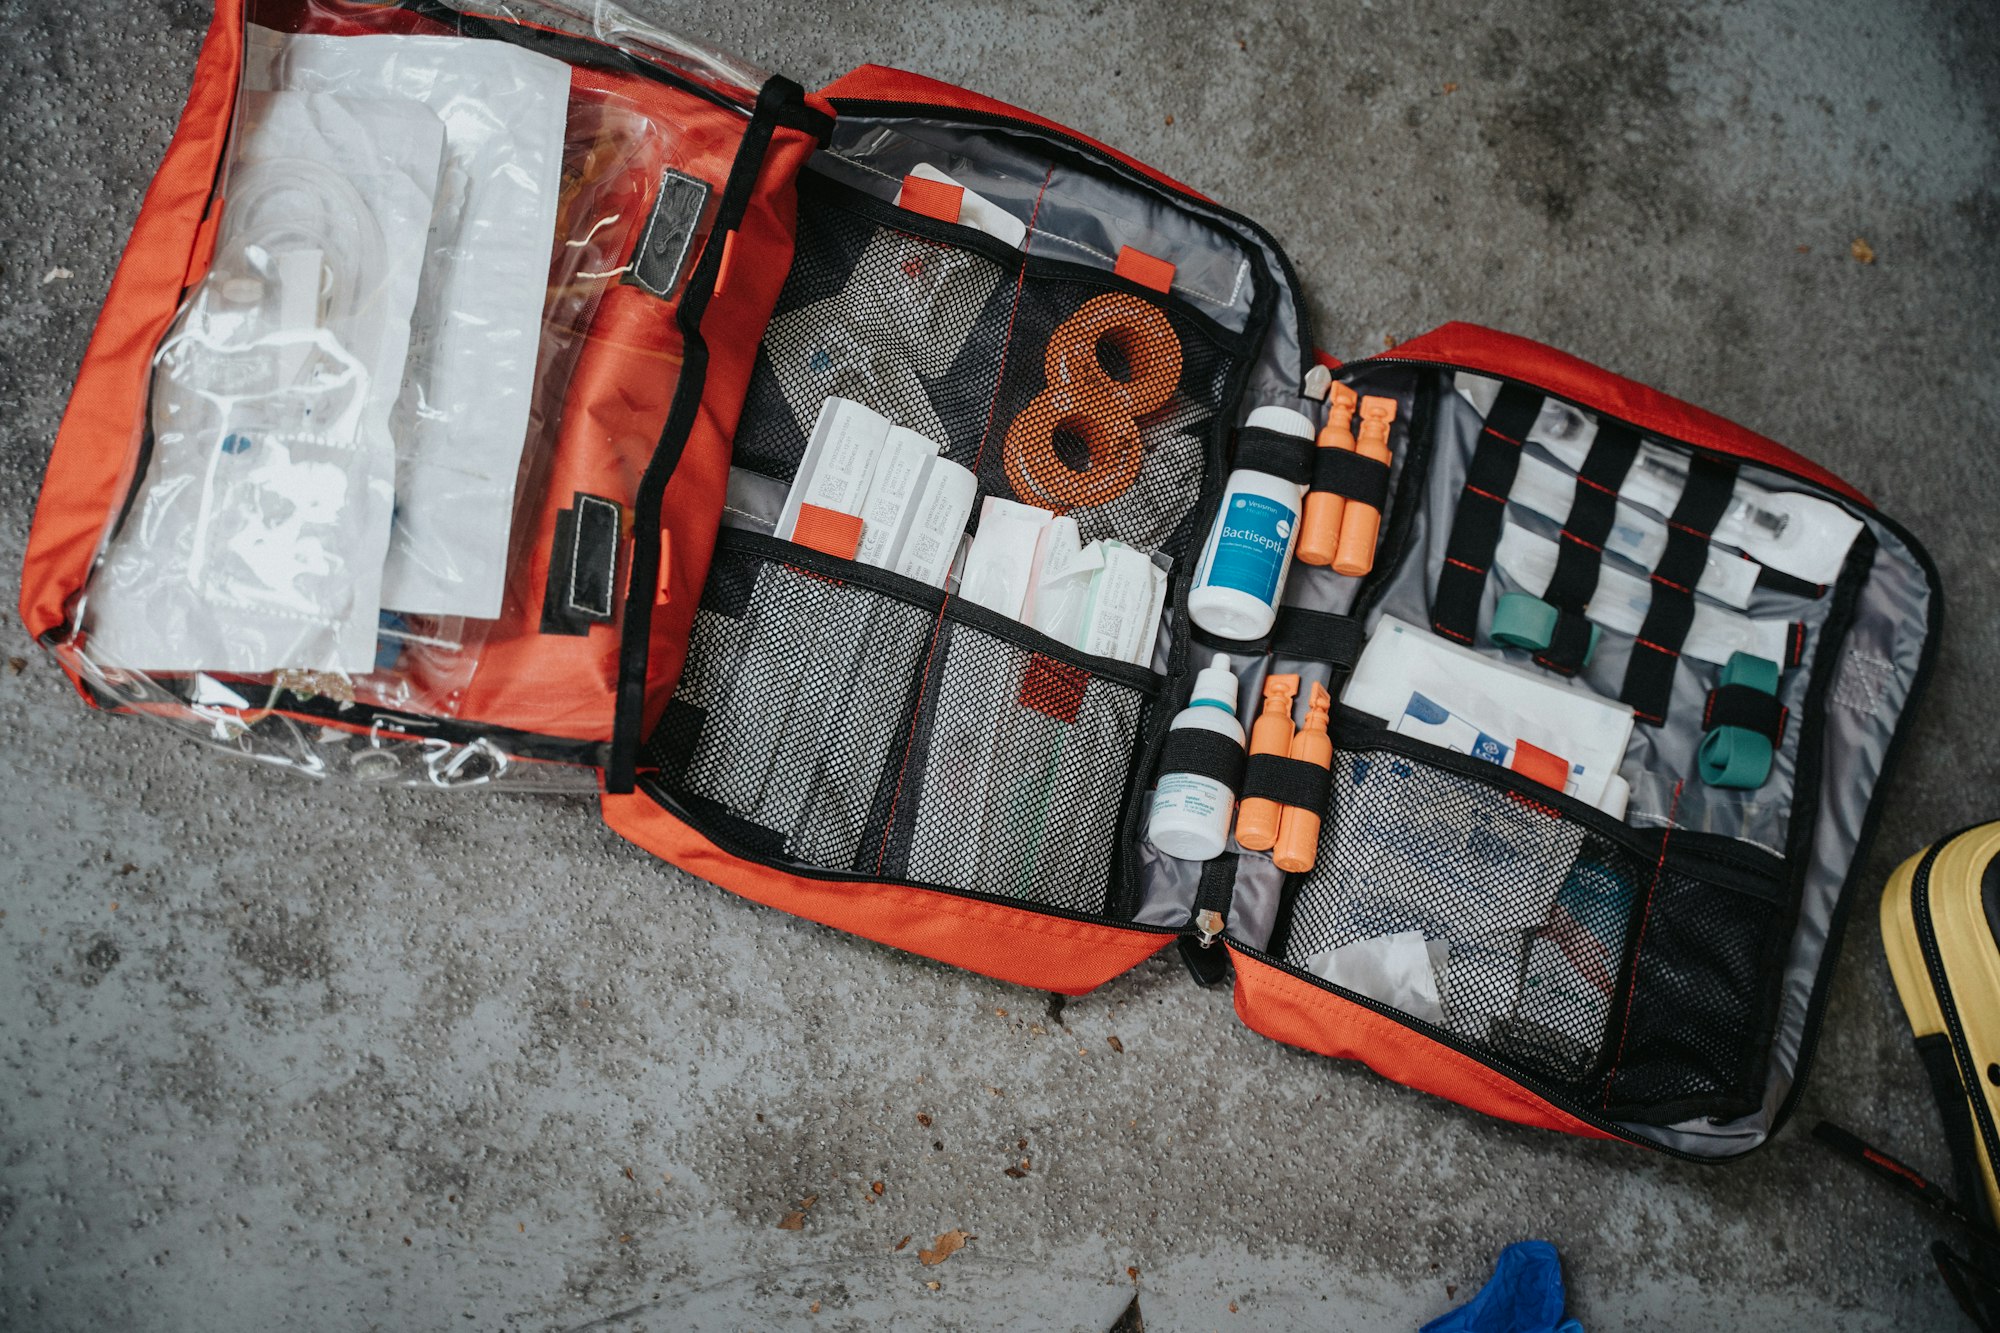 Survival Kit Essentials: What to Pack for Emergencies